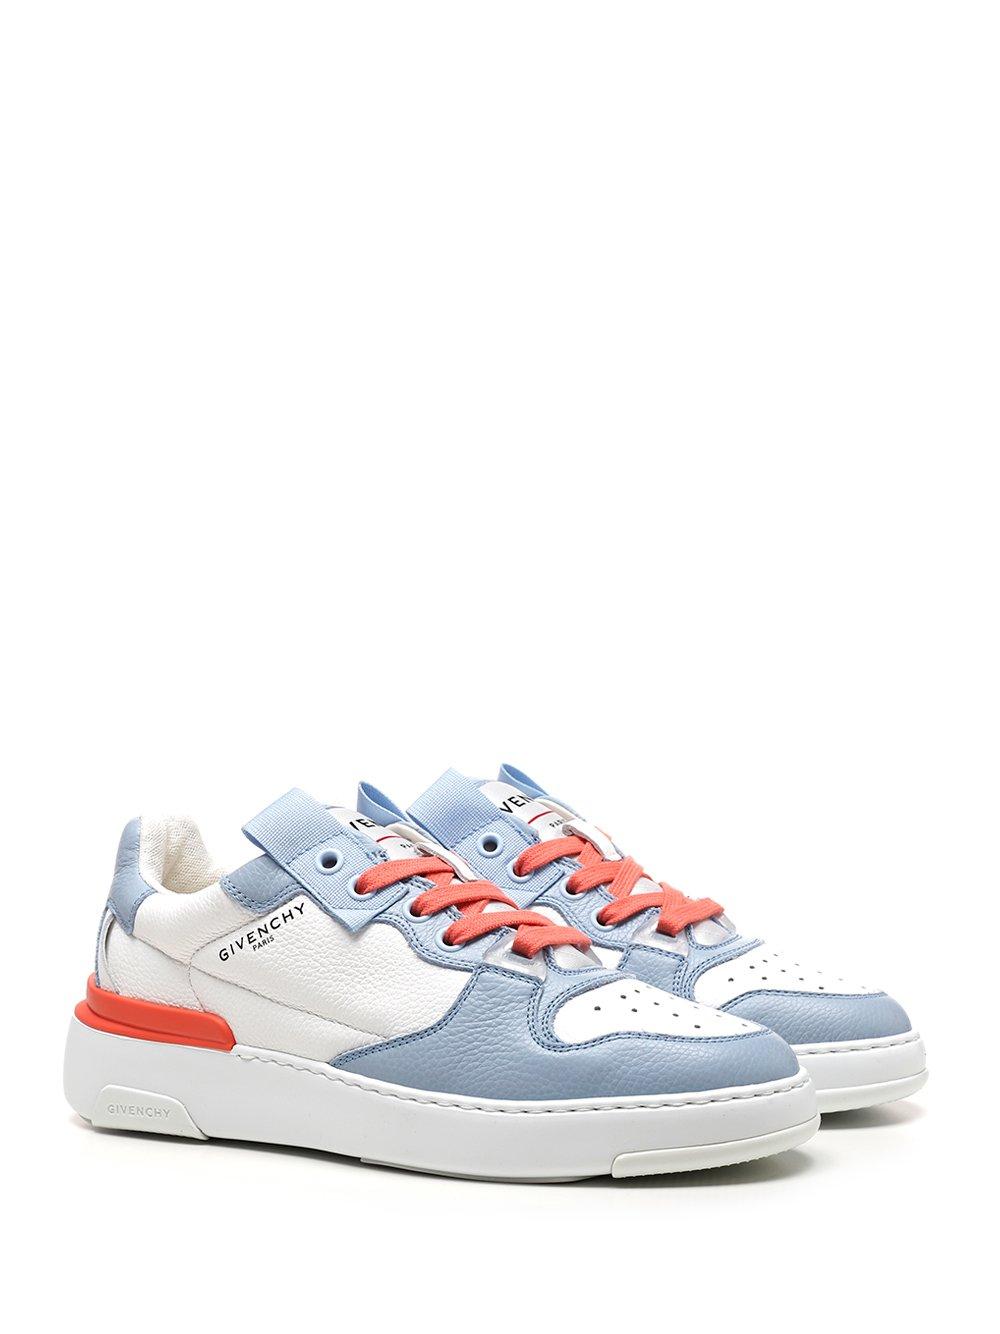 Givenchy Wing Low Three Tone Sneakers in Blue | Lyst